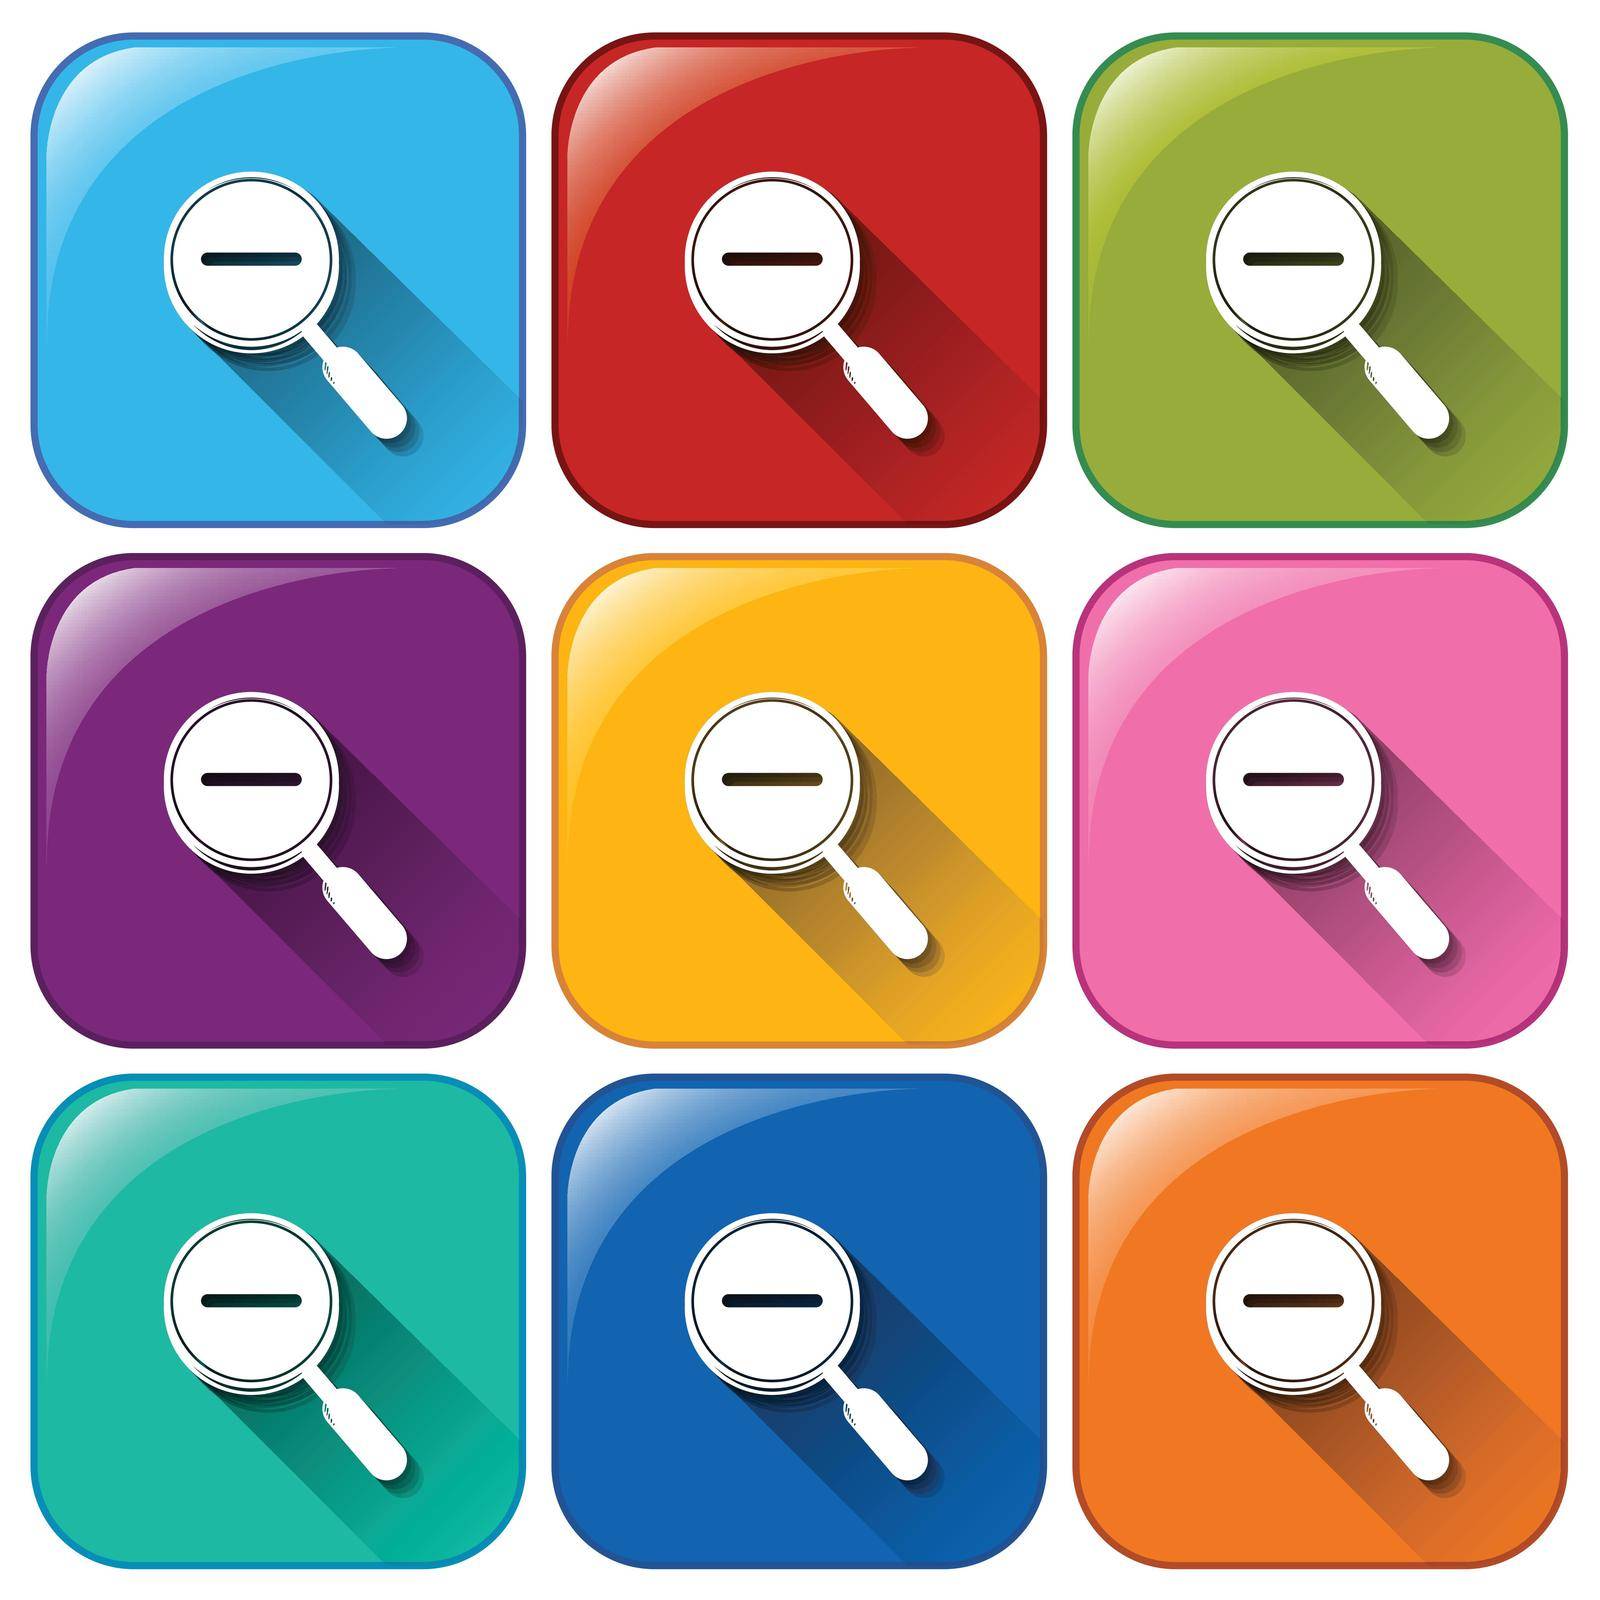 Illustration of the buttons with zoom in symbols on a white background